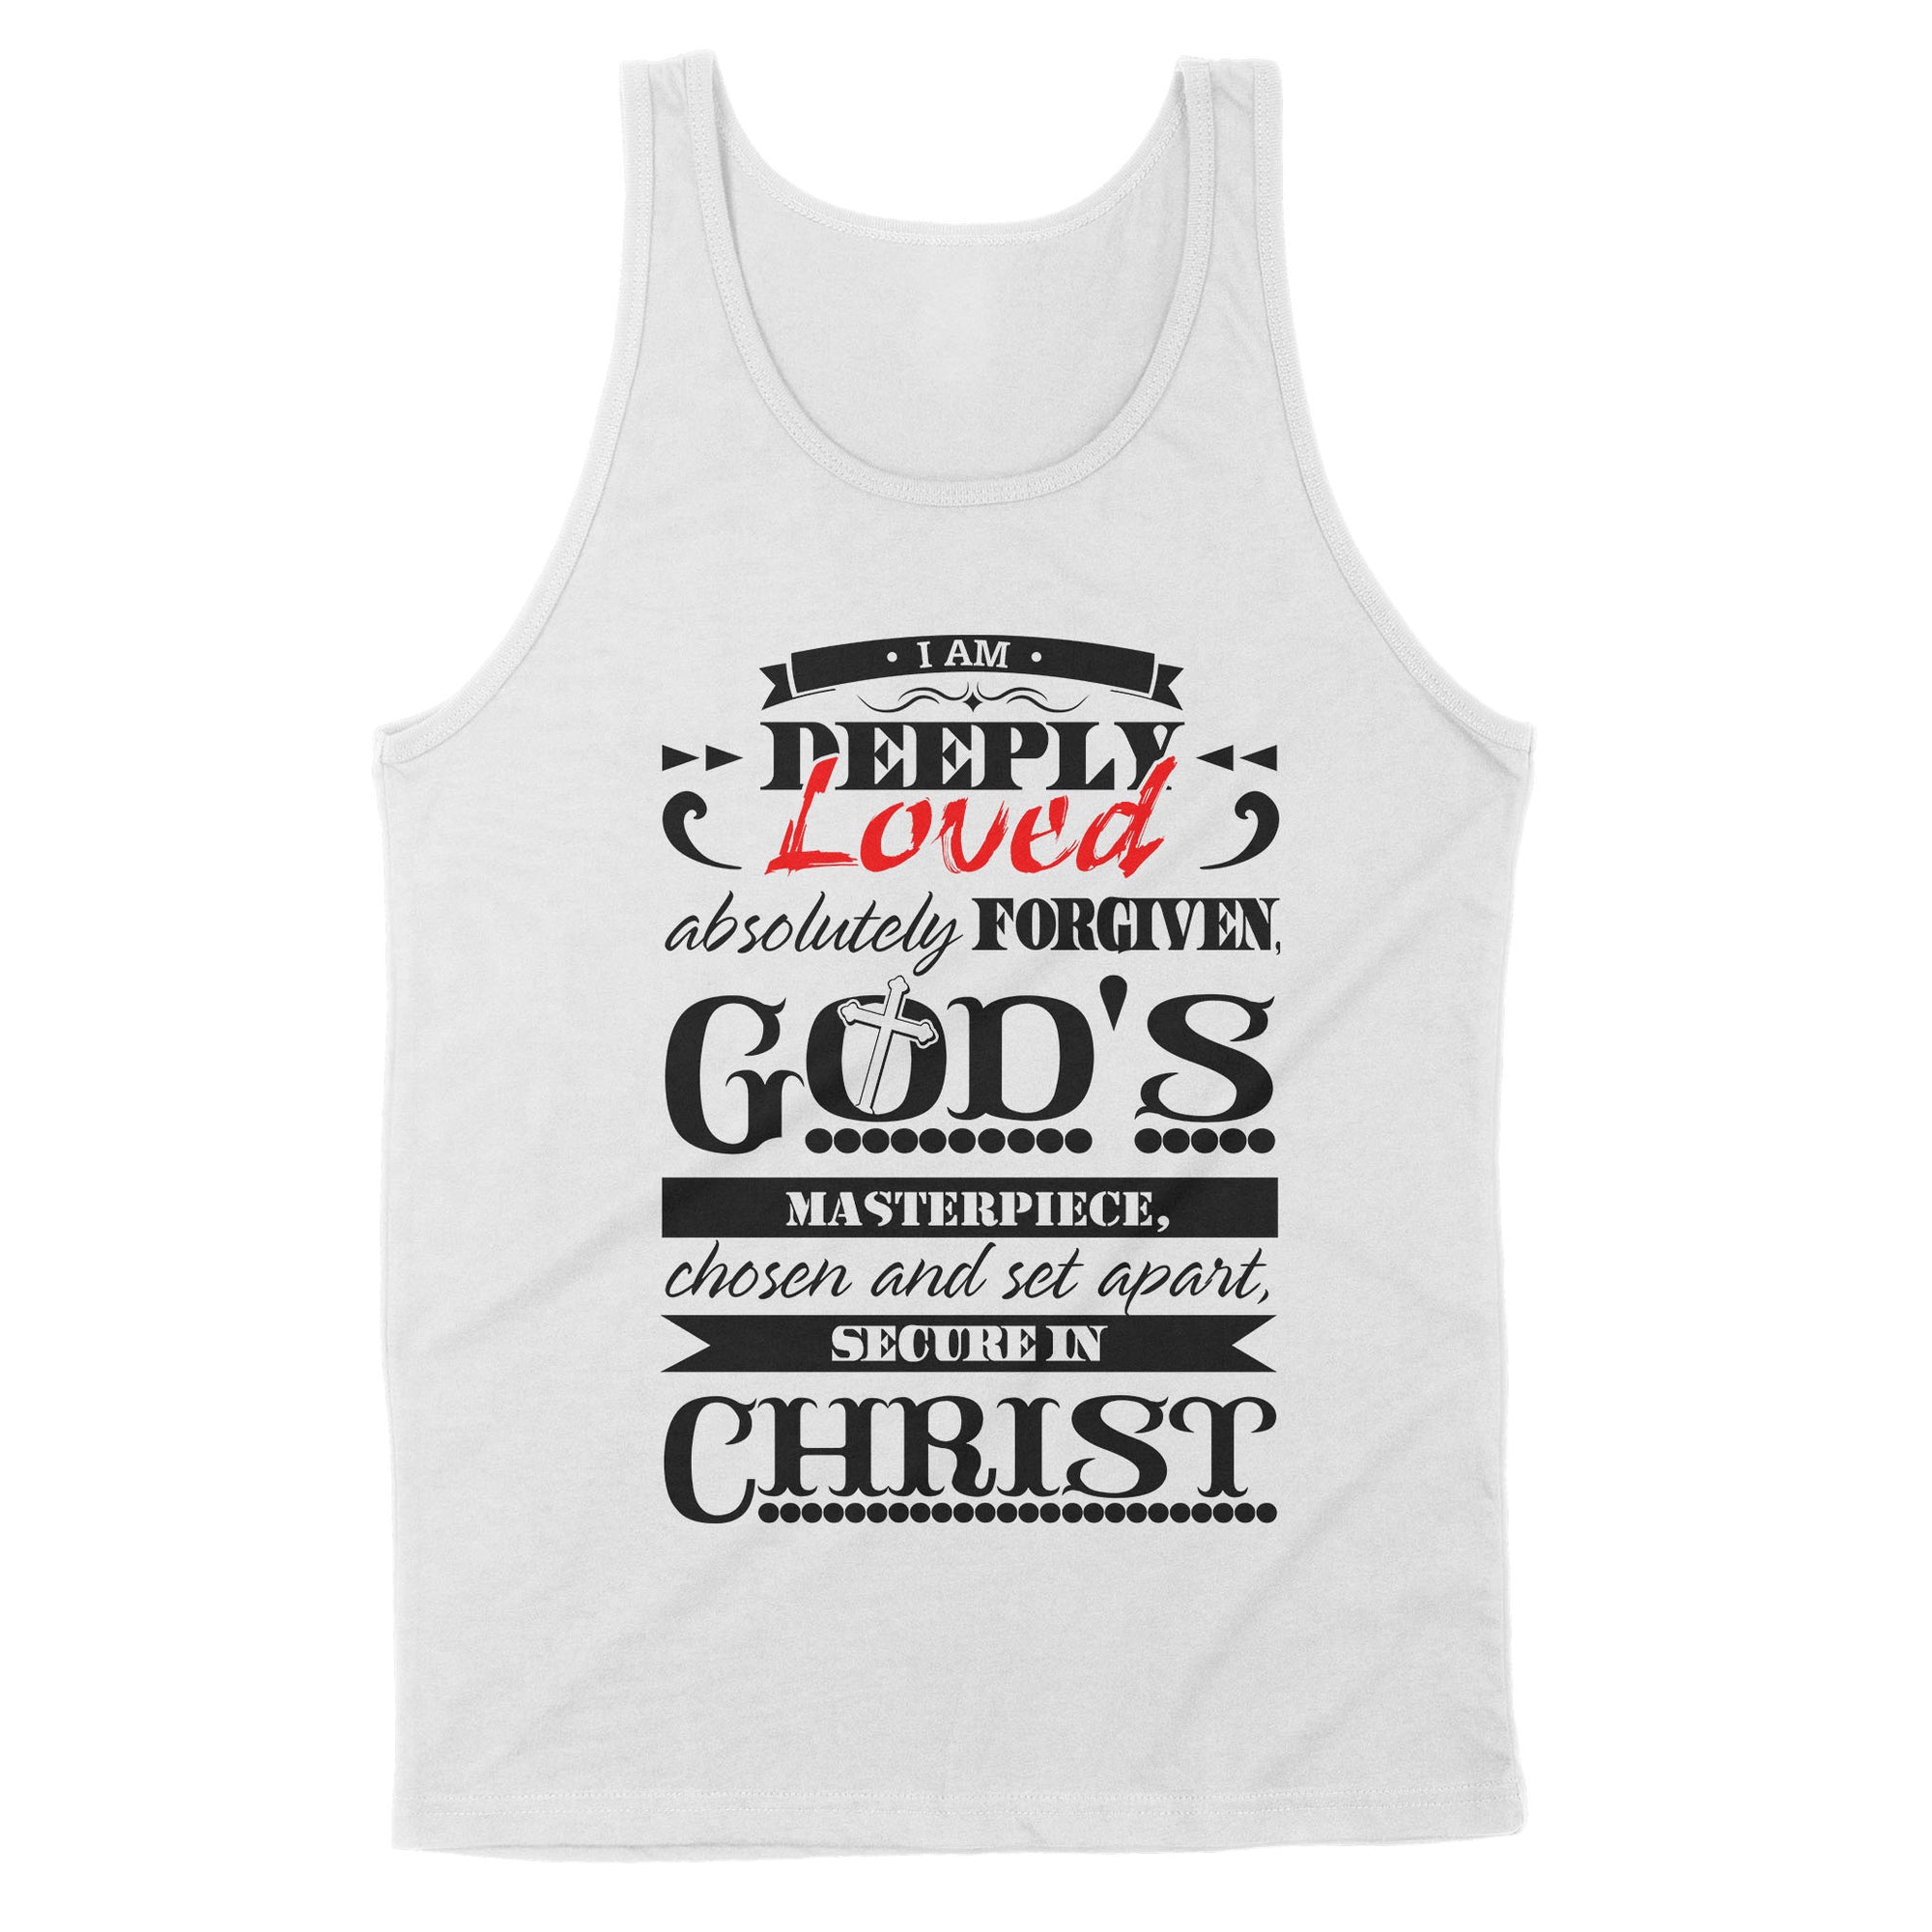 Premium Tank - I Am Deeply Loved, Absolutely Forgiven, God's Masterpiece, Chosen and Set Apart, Secure in Christ